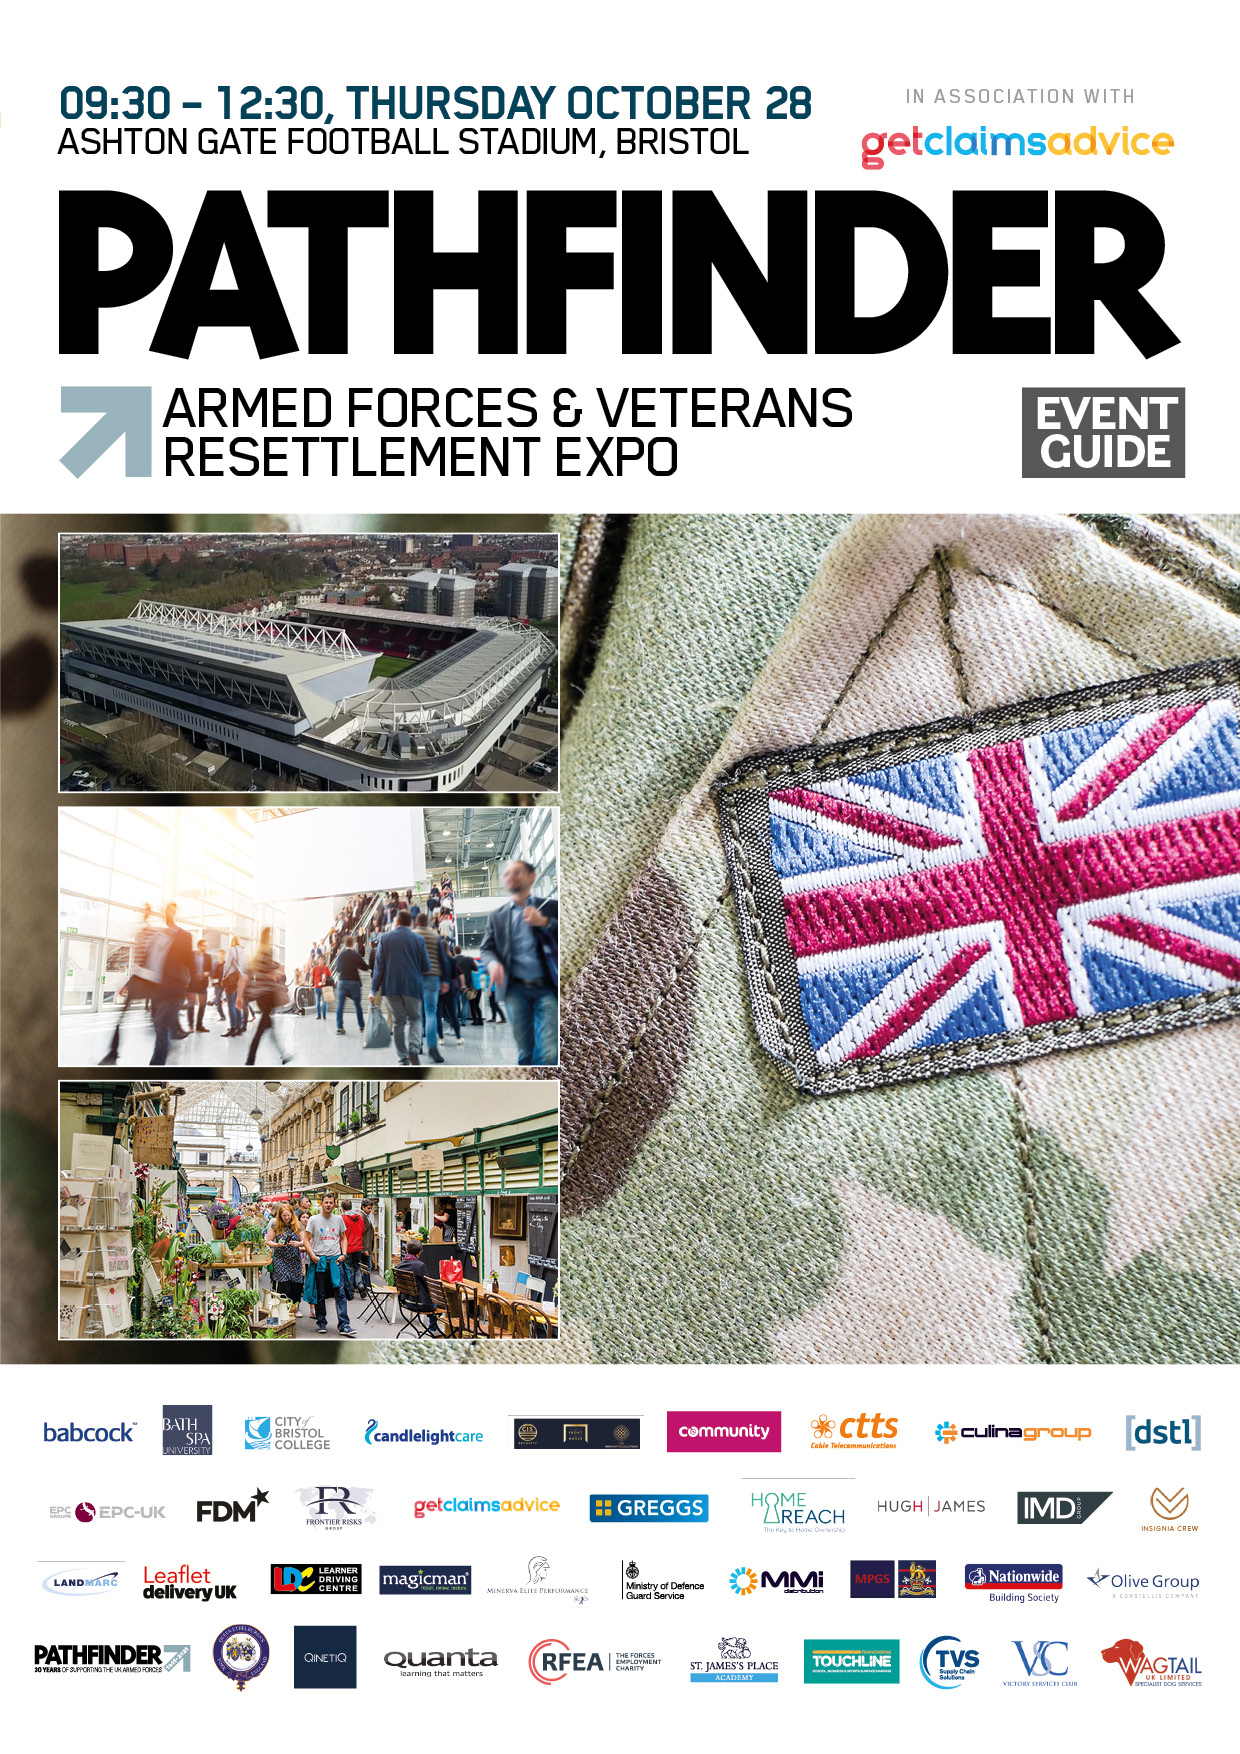 The Armed Forces & Veterans Resettlement Expo Bristol – A Review